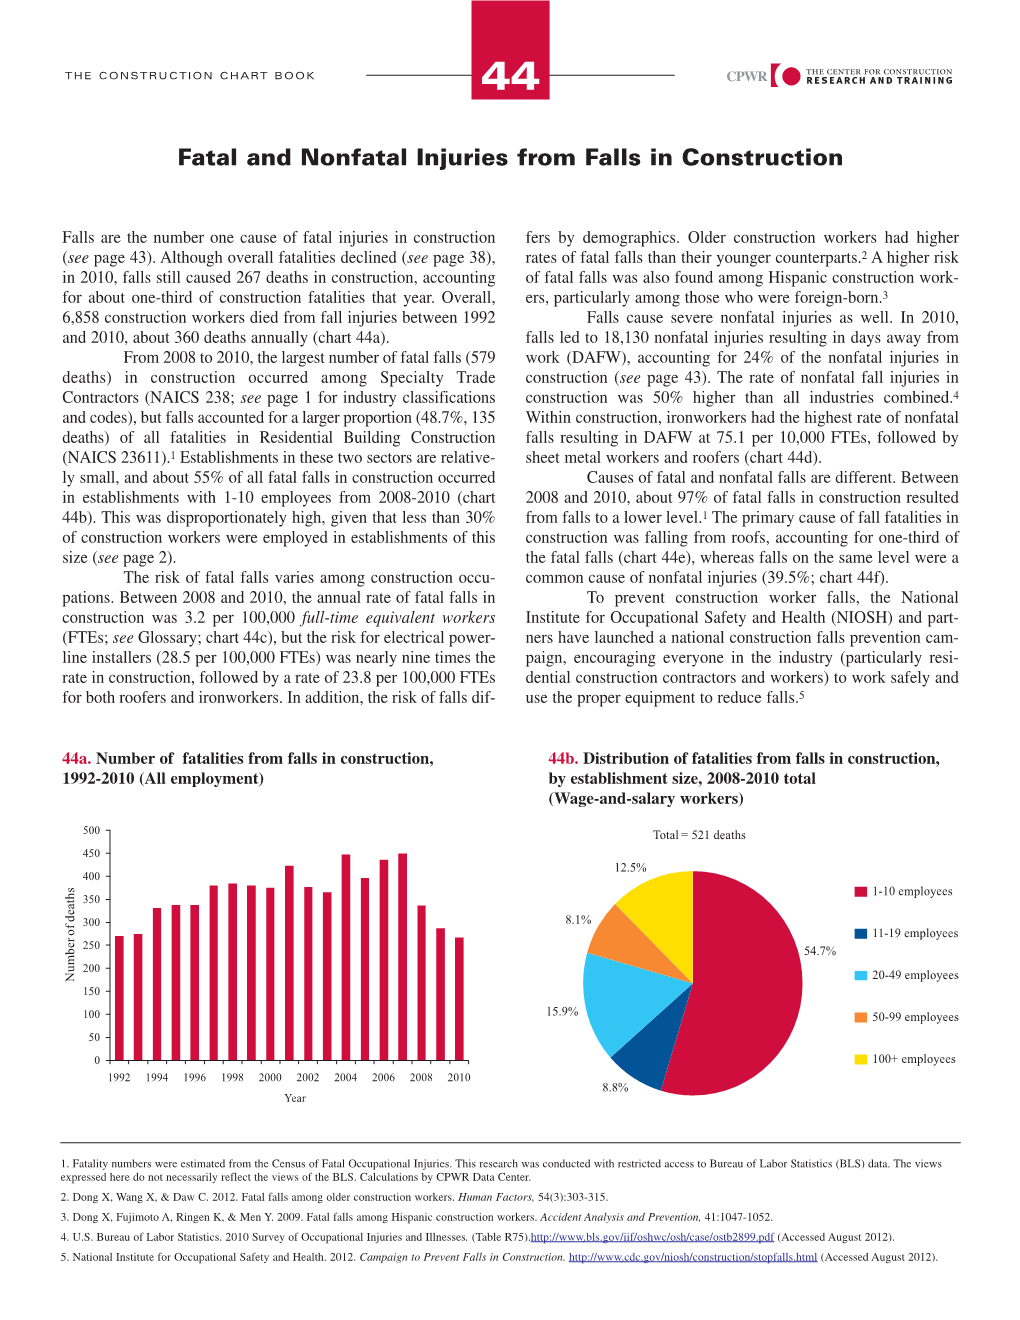 Fatal and Nonfatal Injuries from Falls in Construction